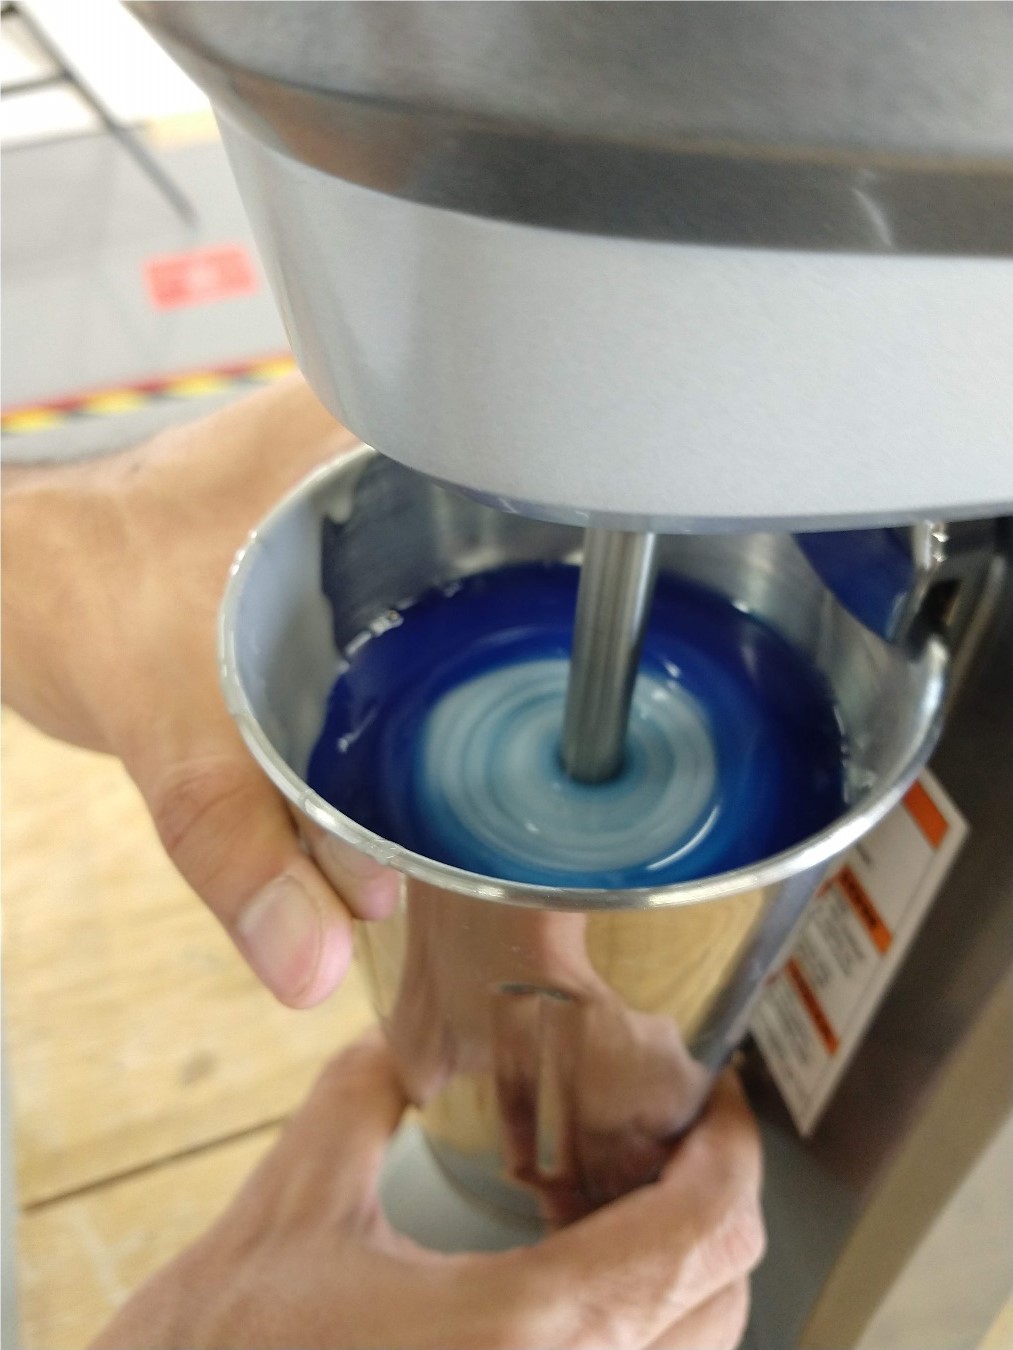 The silicone on the blender